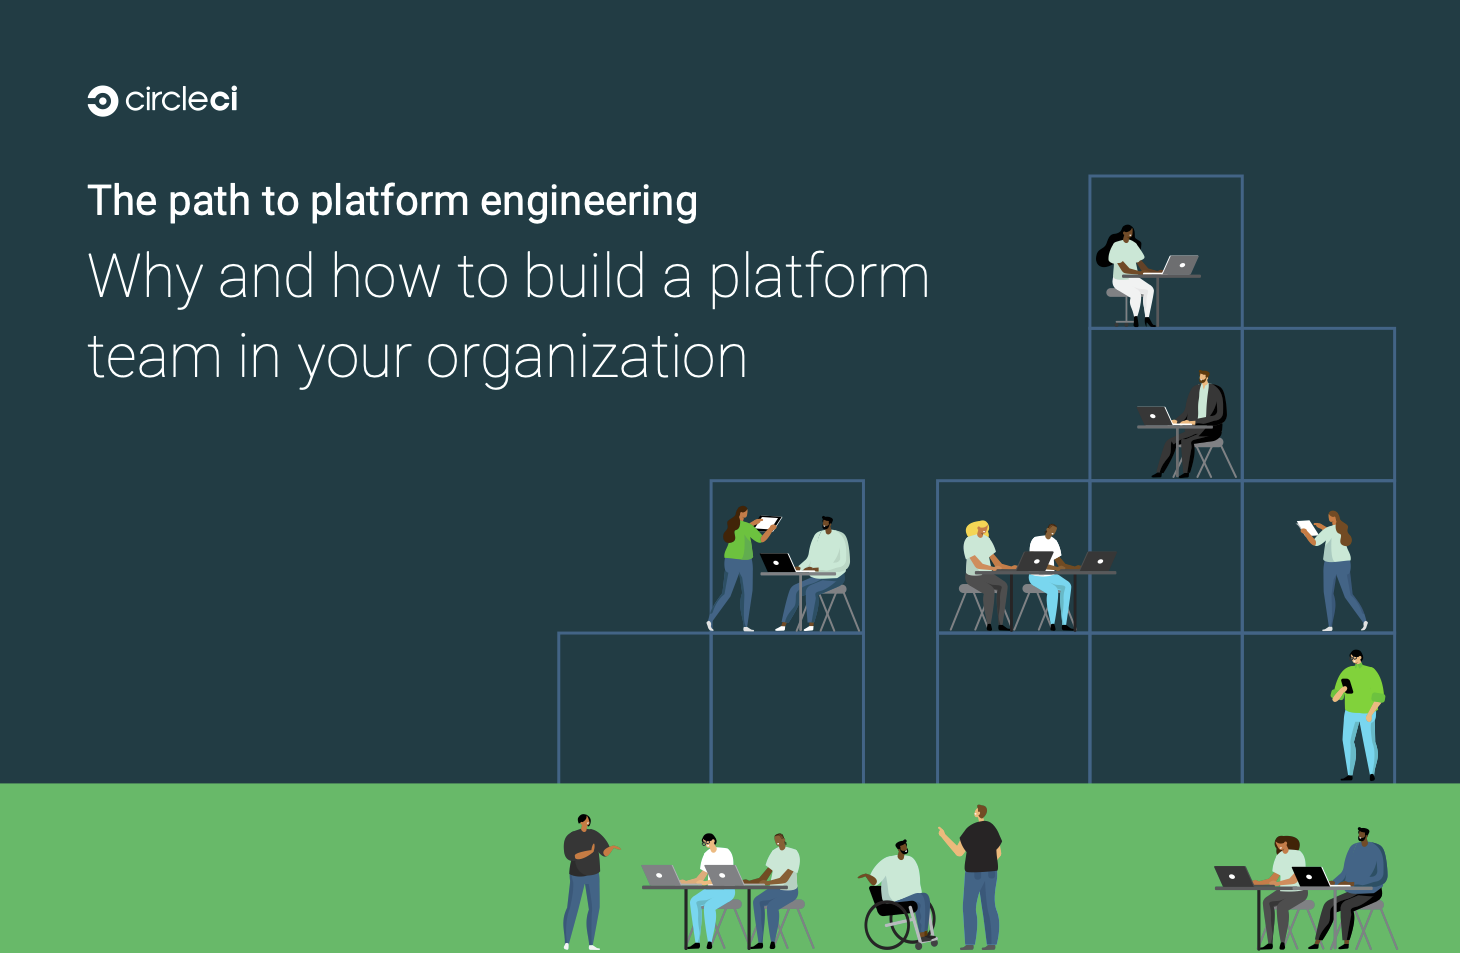 A group of engineers build a vertical framework that elevates and supports other development teams.